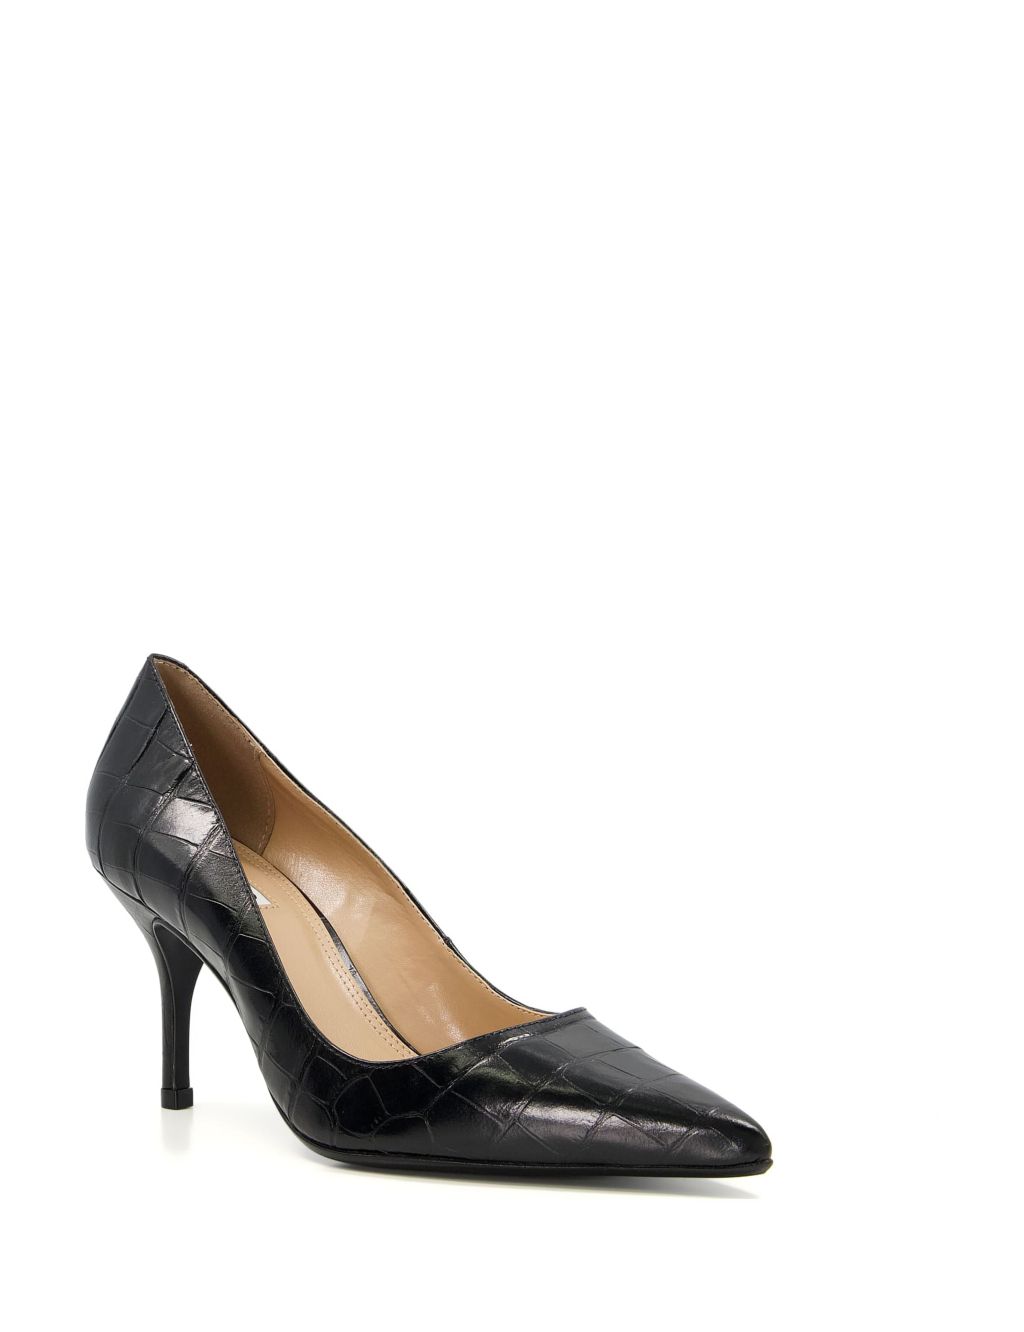 Leather Croc Stiletto Pointed Court Shoes